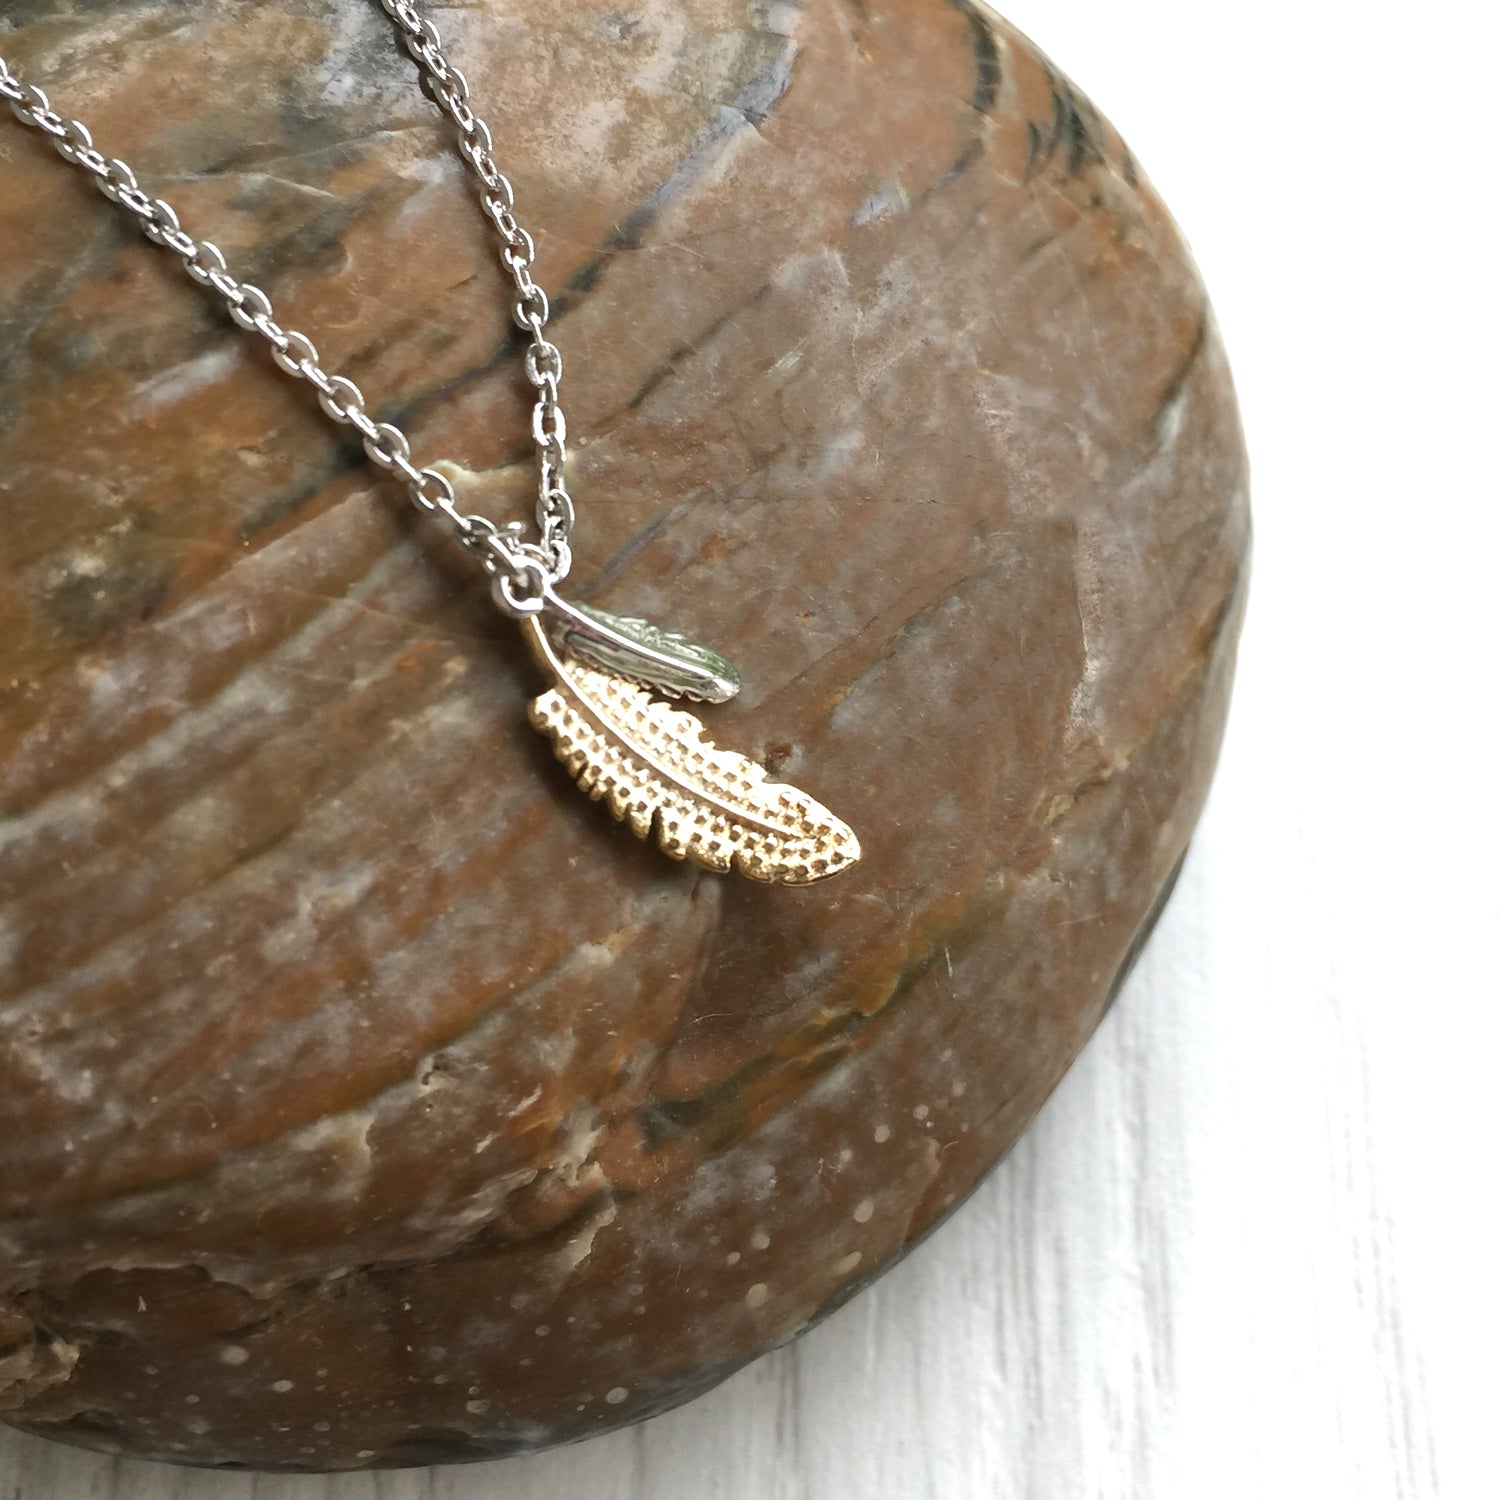 Tiny Silver Necklace, Small Feather Necklace, Minimalist Jewelry